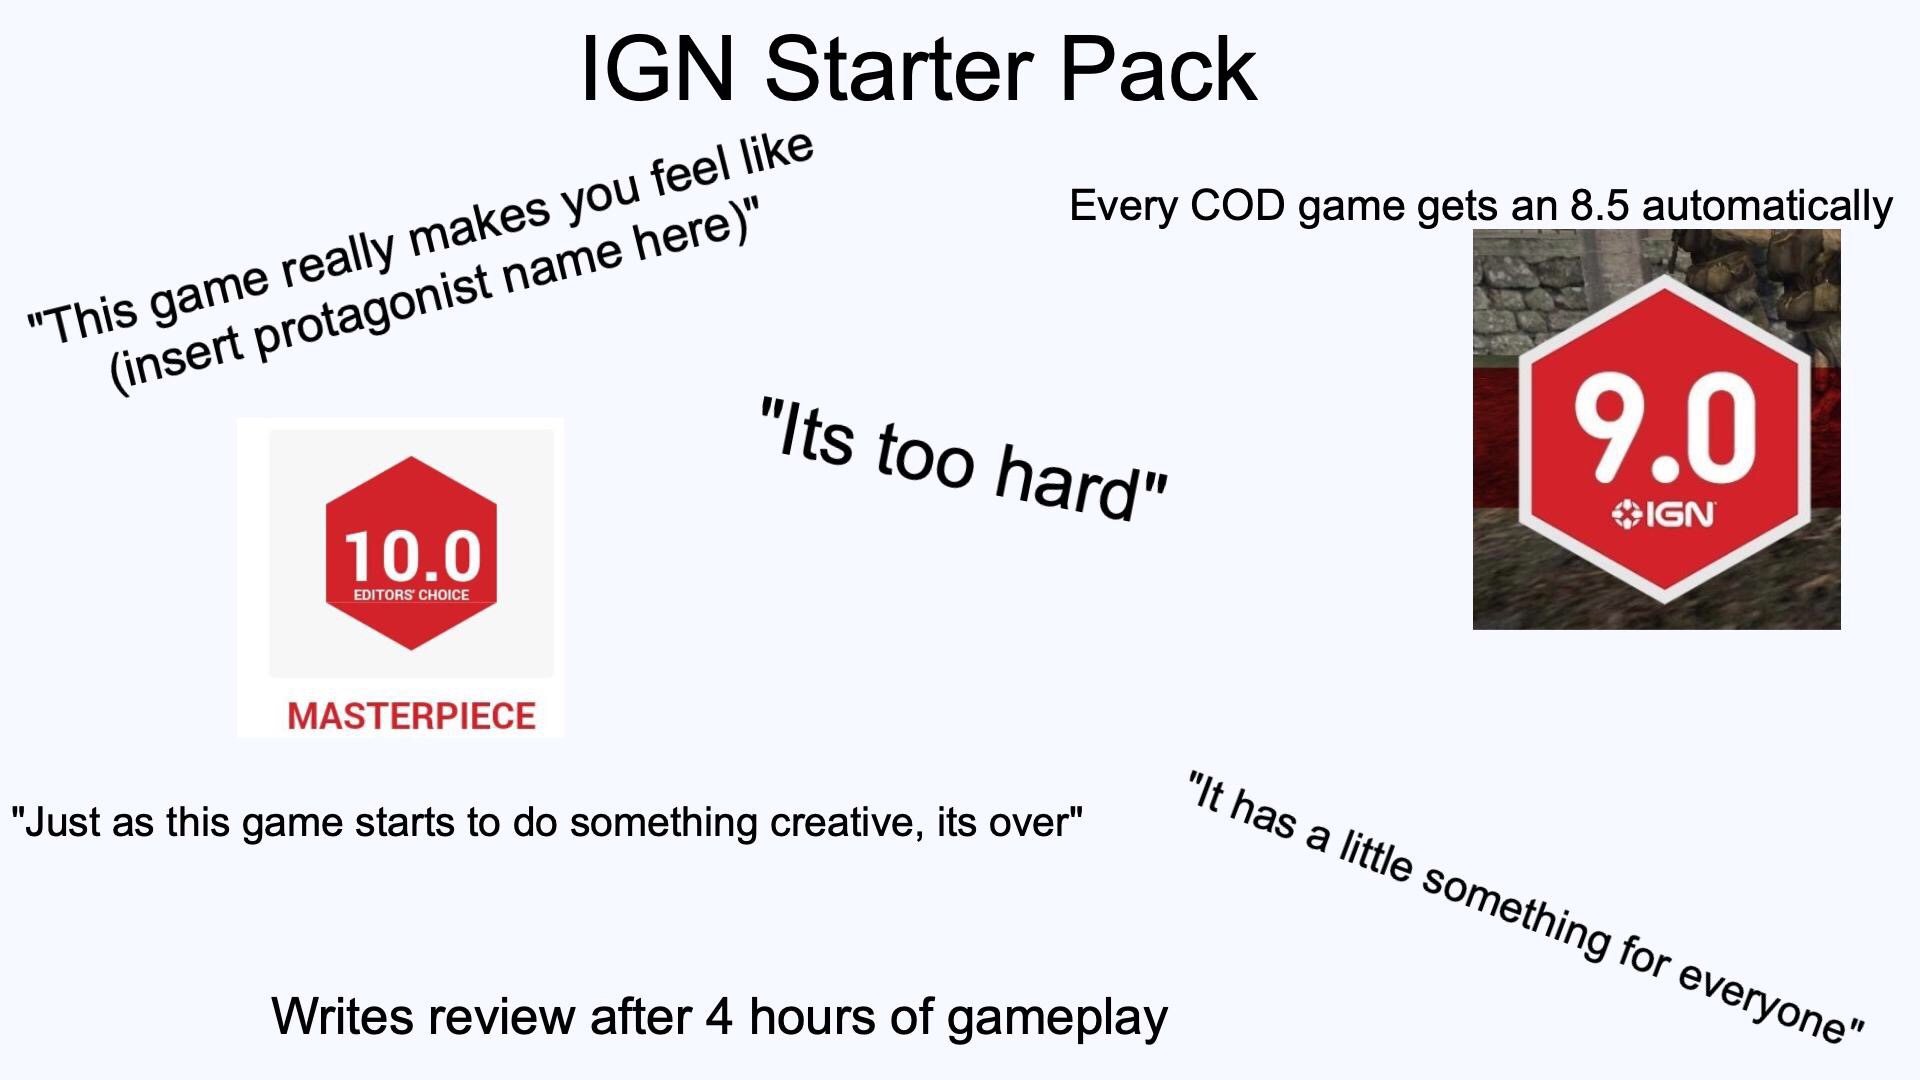 signage - Ign Starter Pack Every Cod game gets an 8.5 automatically "This game really makes you feel insert protagonist name here" "Its too hard" 19.0 Ign 10.0 Editors Choice Masterpiece "It has a little something for everyone" "Just as this game starts t